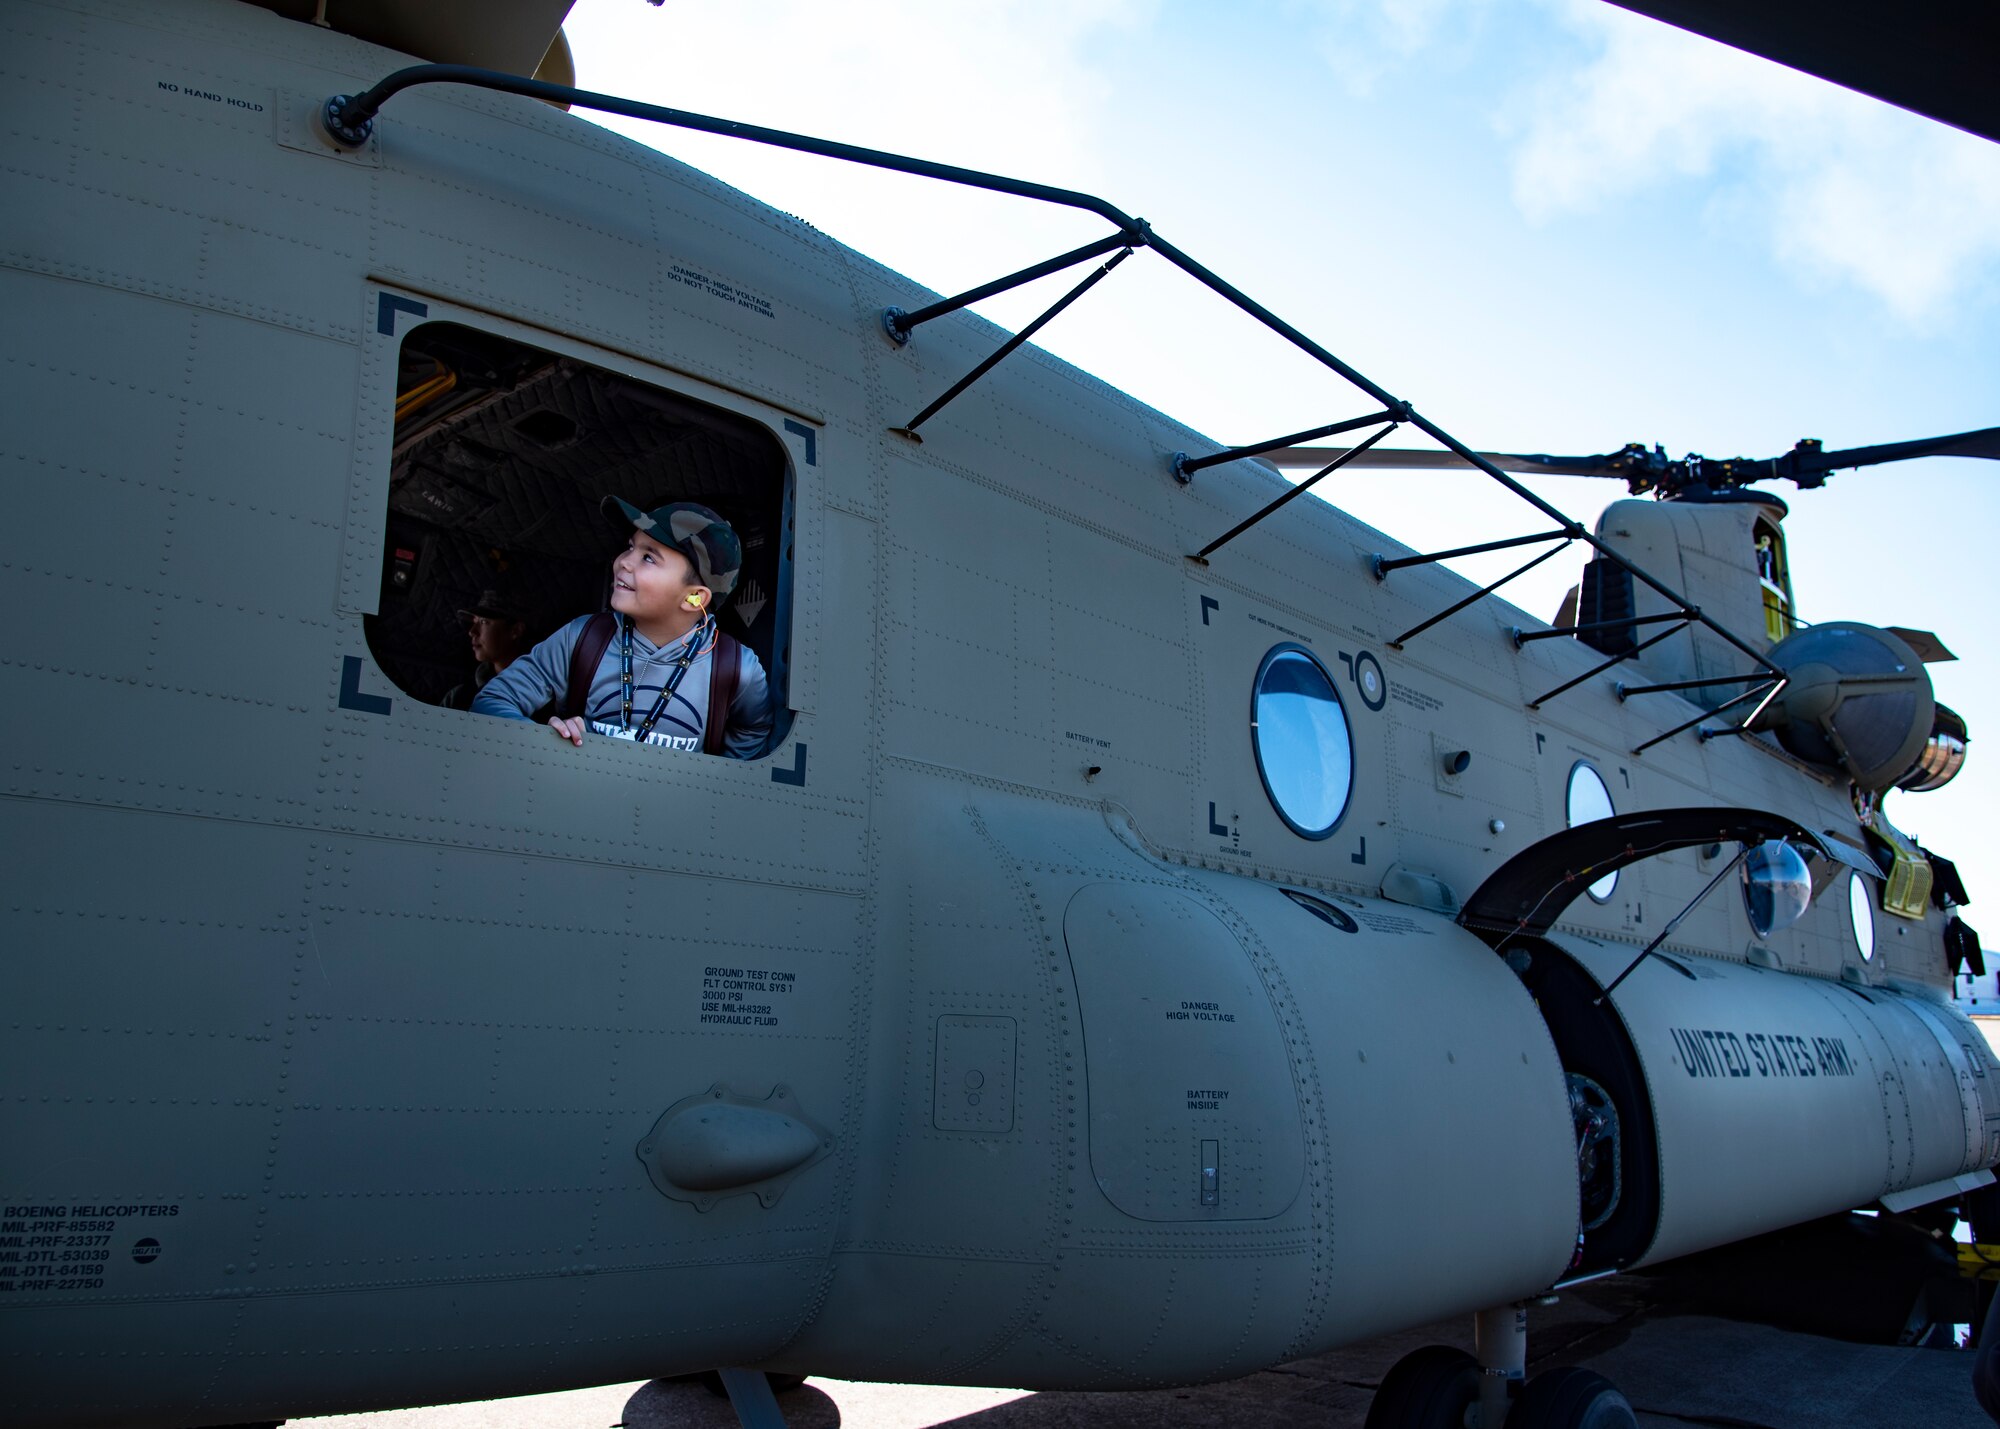 An event goer looks out of a CH-47 Chinook at the Sheppard Air Force Base Guardians of Freedom Open House and Air Show at Sheppard AFB, Texas, Oct. 27, 2019. The open house and air show was a opportunity for the local community to come and see some of the inner workings of Sheppard AFB. It also allowed Sheppard to educate the community on it's mission and the Air Force's role in defending freedom. There were also multiple recruiters to help educate the spectators as well. (U.S. Air Force photo by Airman 1st Class Pedro Tenorio)